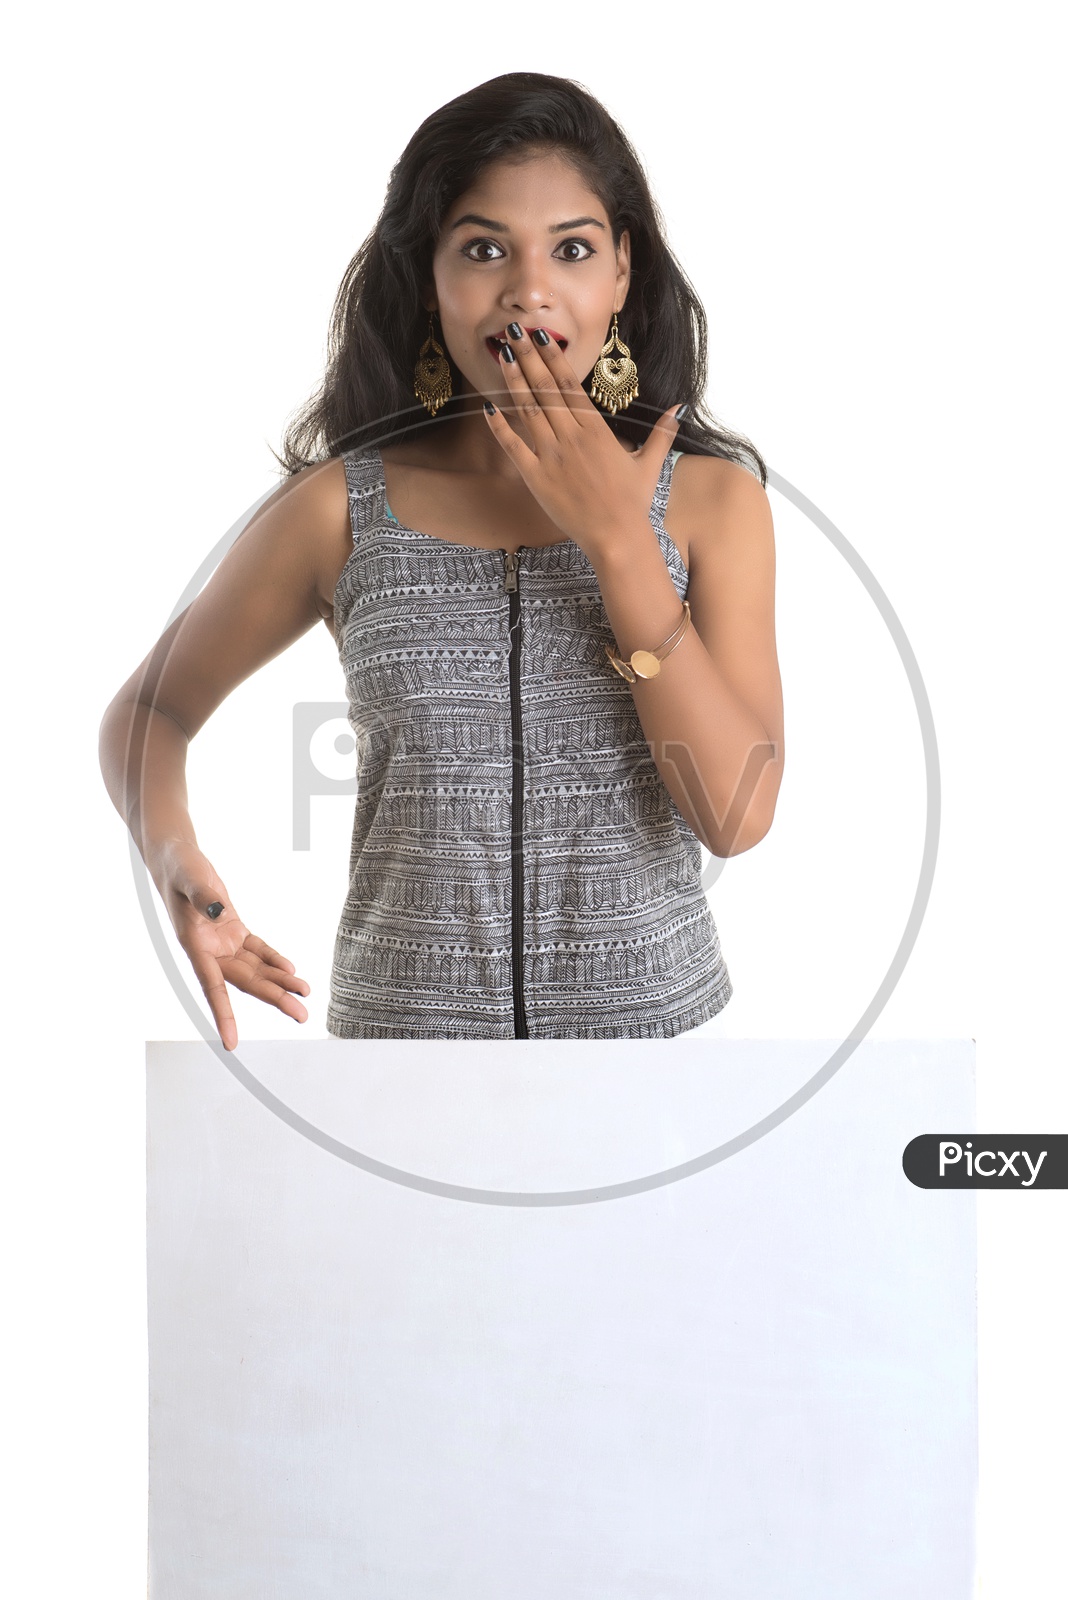 Indian woman with hand on her mouth